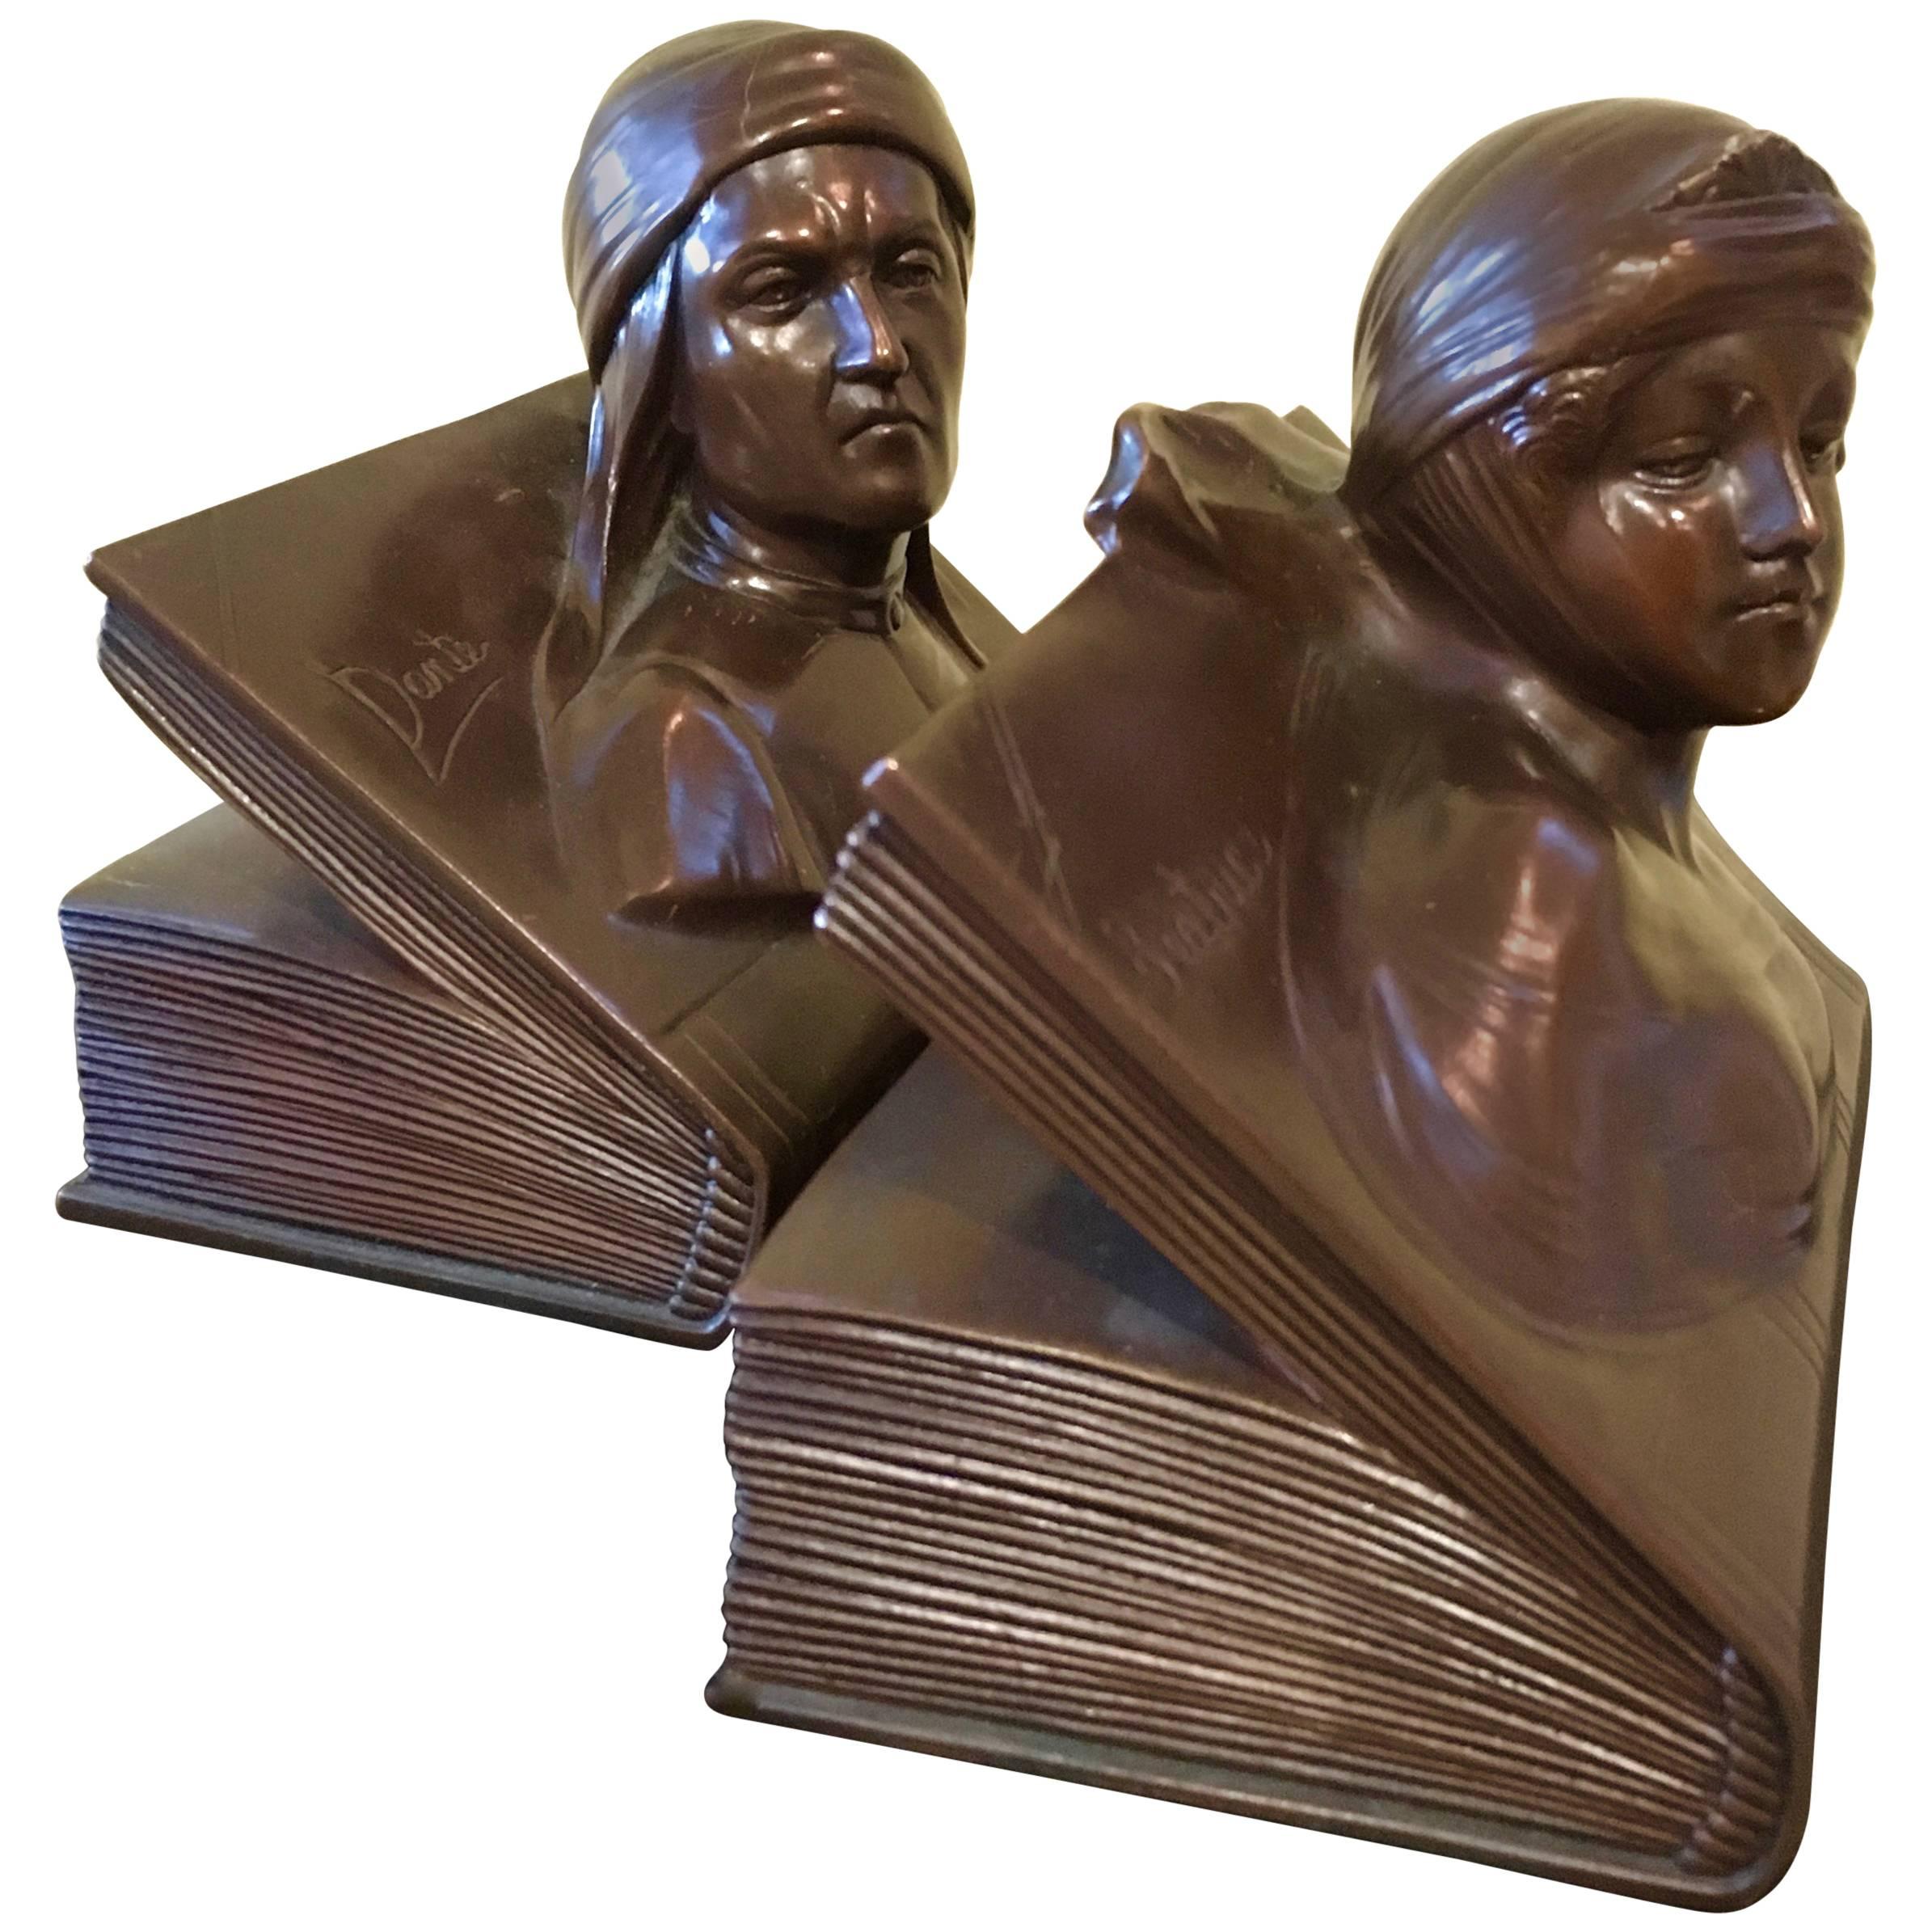 Pair of Bookends with Beatrice and Dante